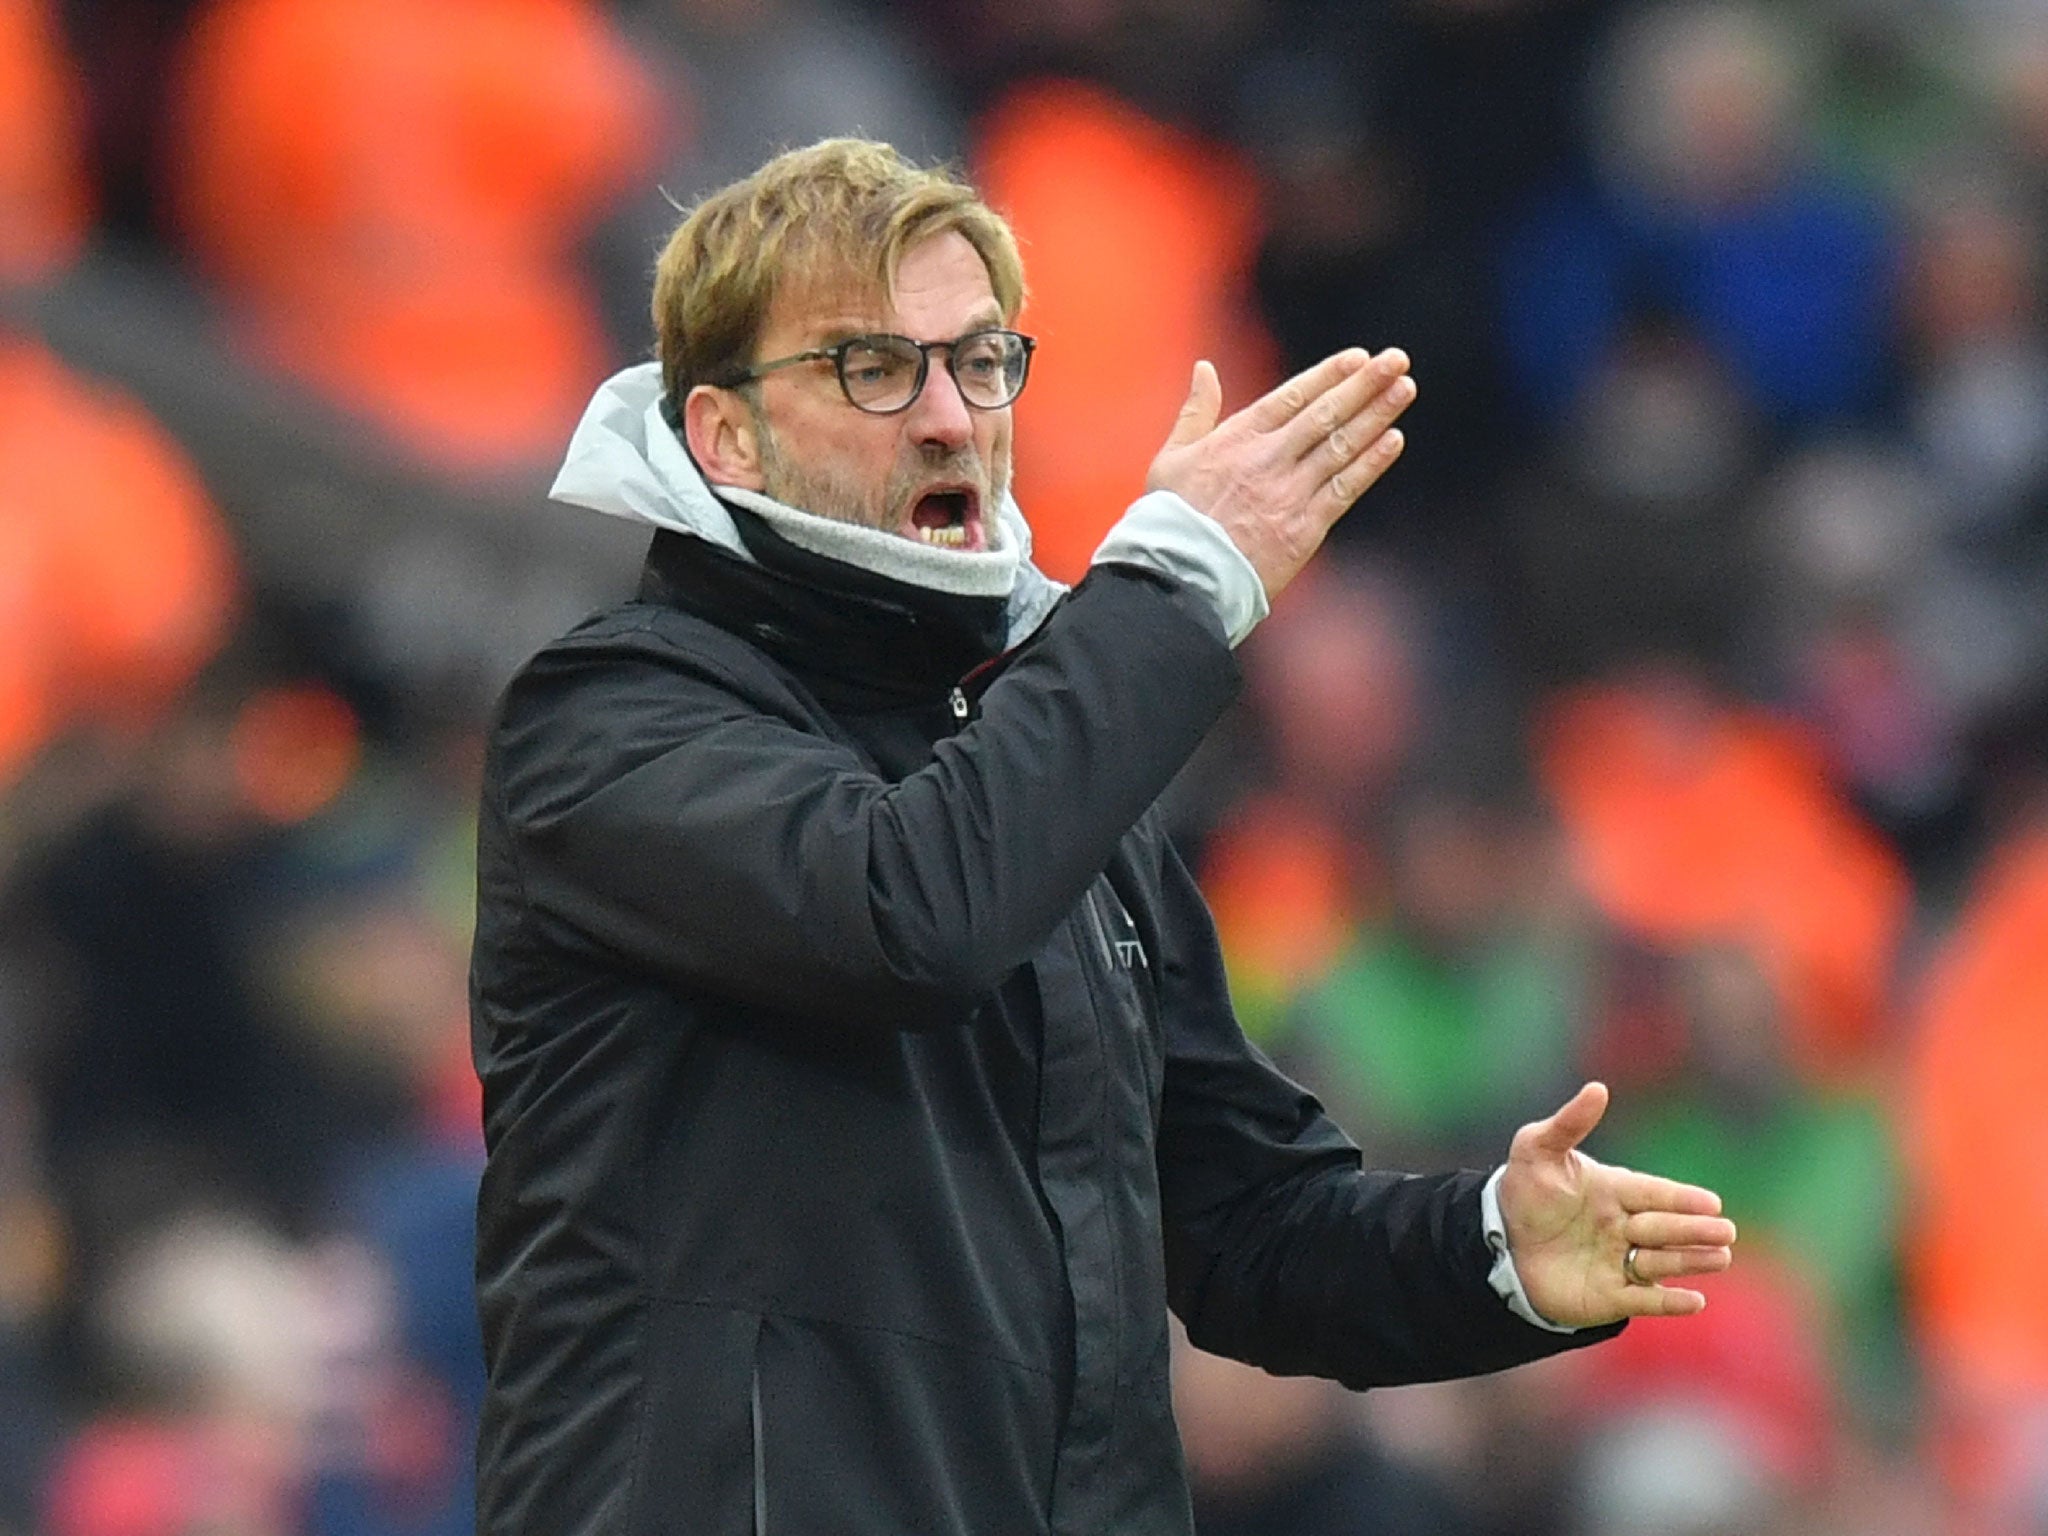 Jurgen Klopp was furious with Liverpool's 3-2 defeat by Swansea and blamed his defence